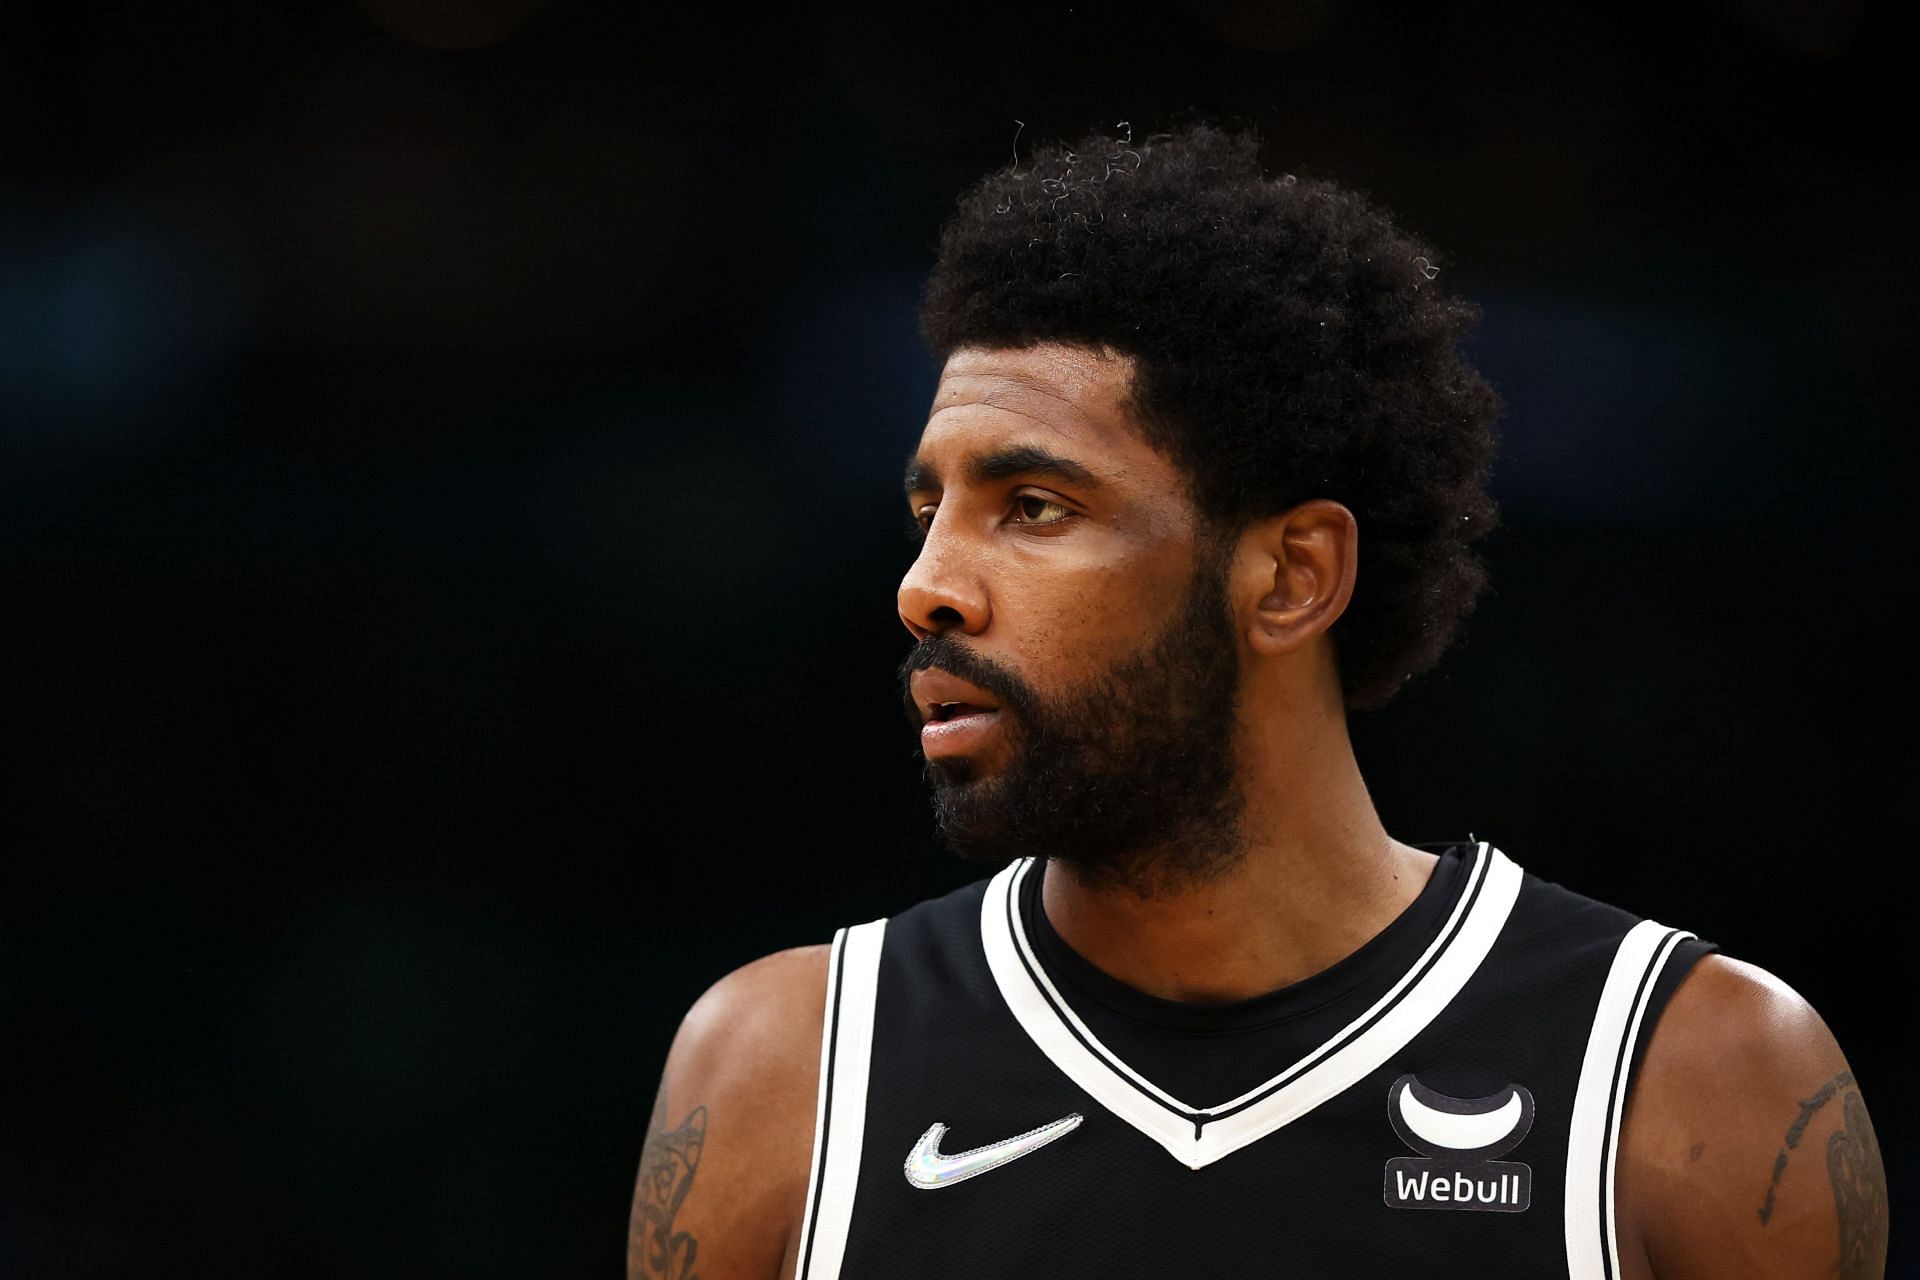 Kyrie Irving of the Brooklyn Nets in the 2022 NBA playoffs